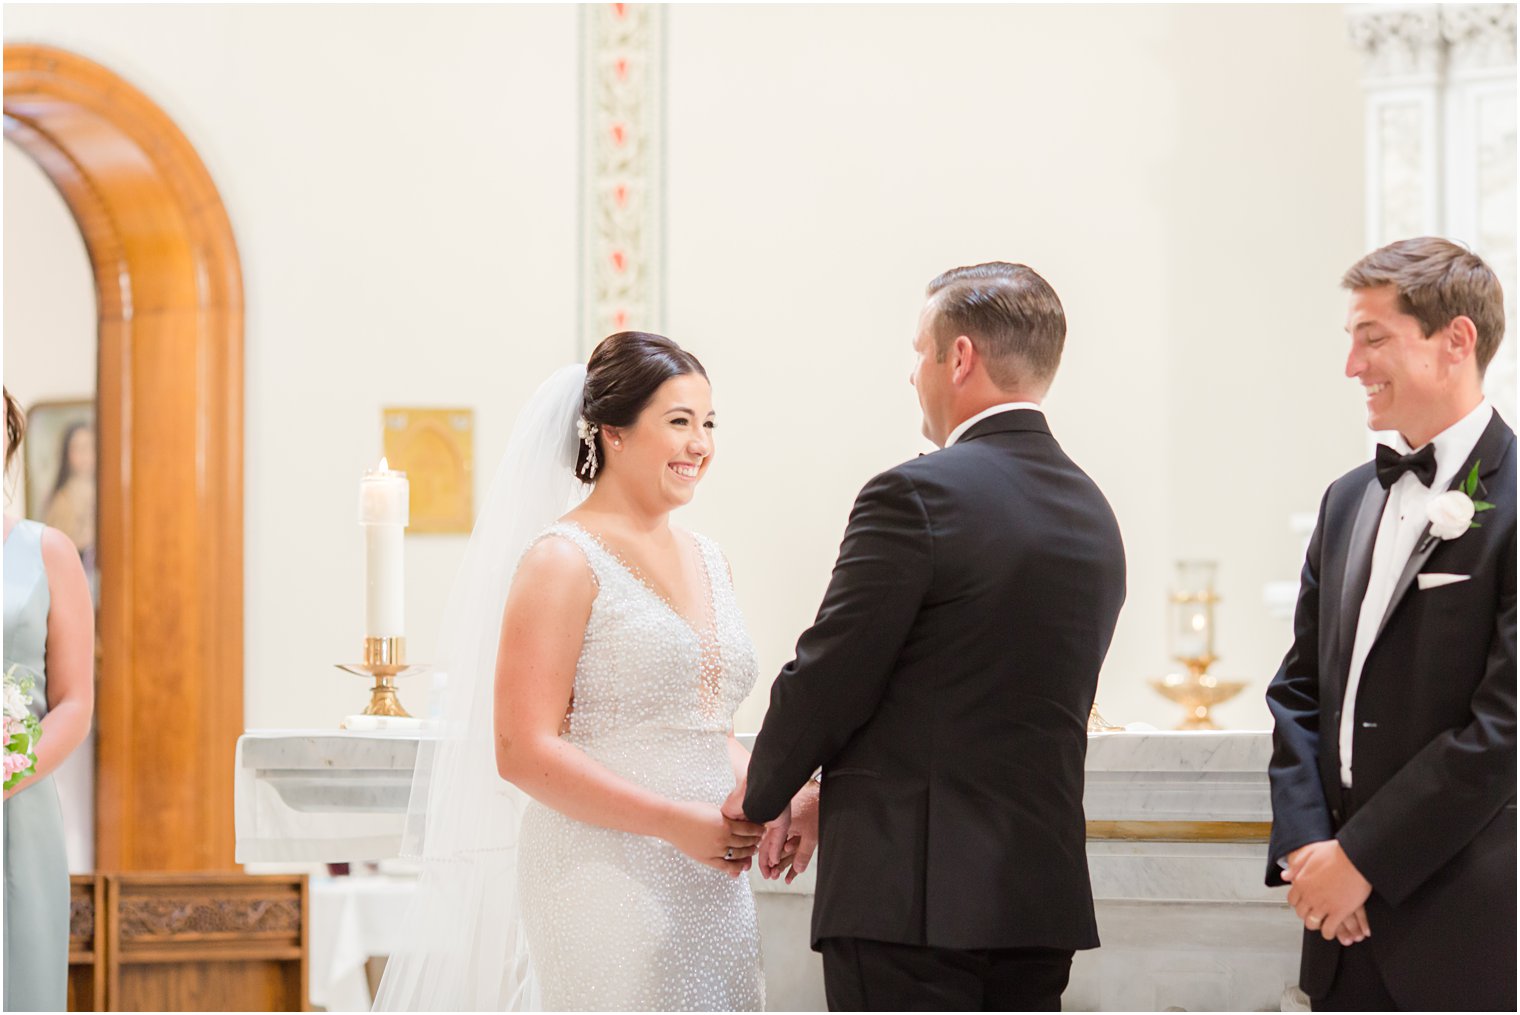 couple exchanges vows in traditional wedding ceremony at St. James church